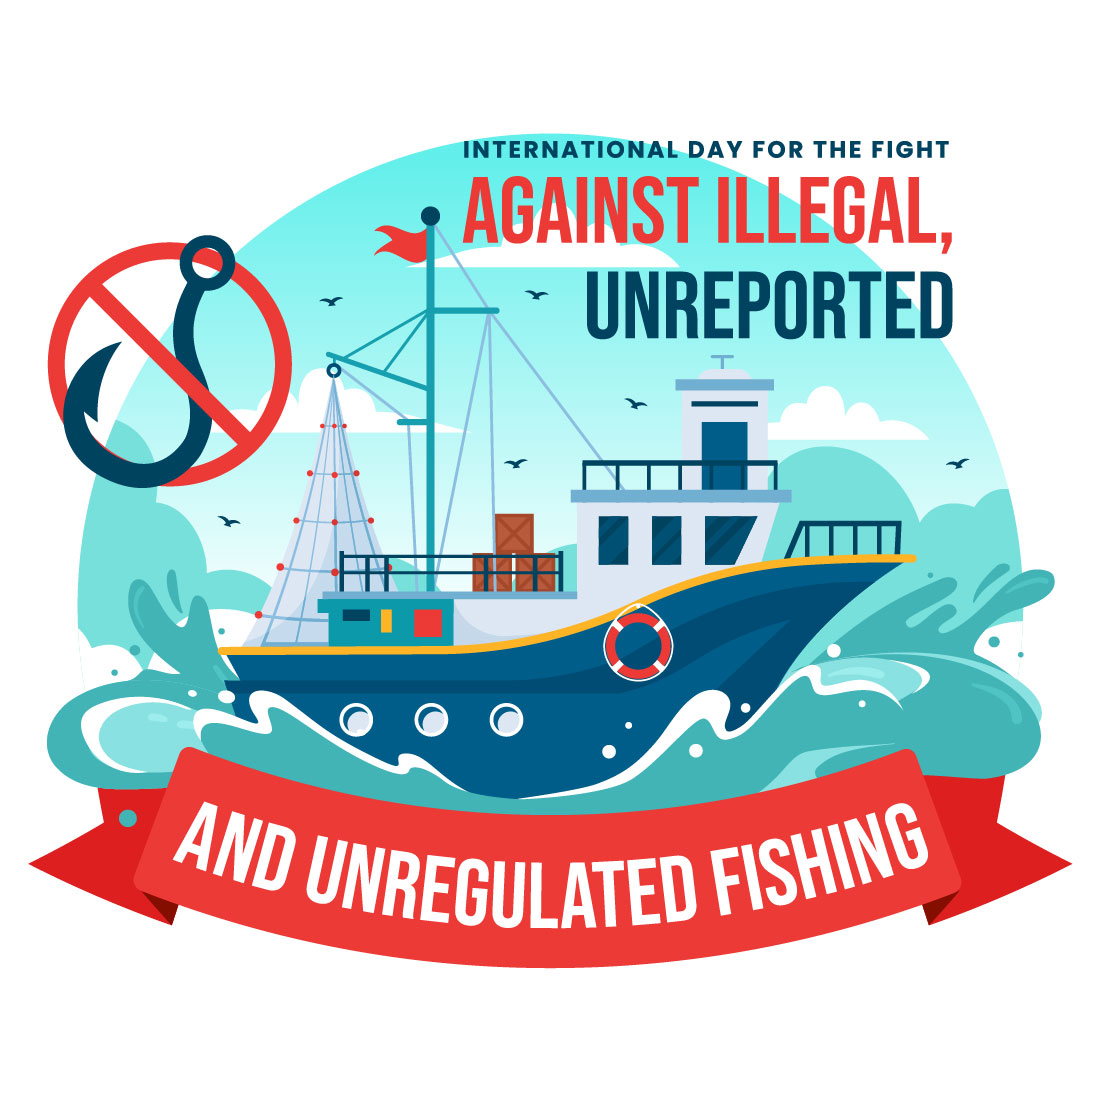 10 Day for the Illegal Against Fishing Illustration cover image.